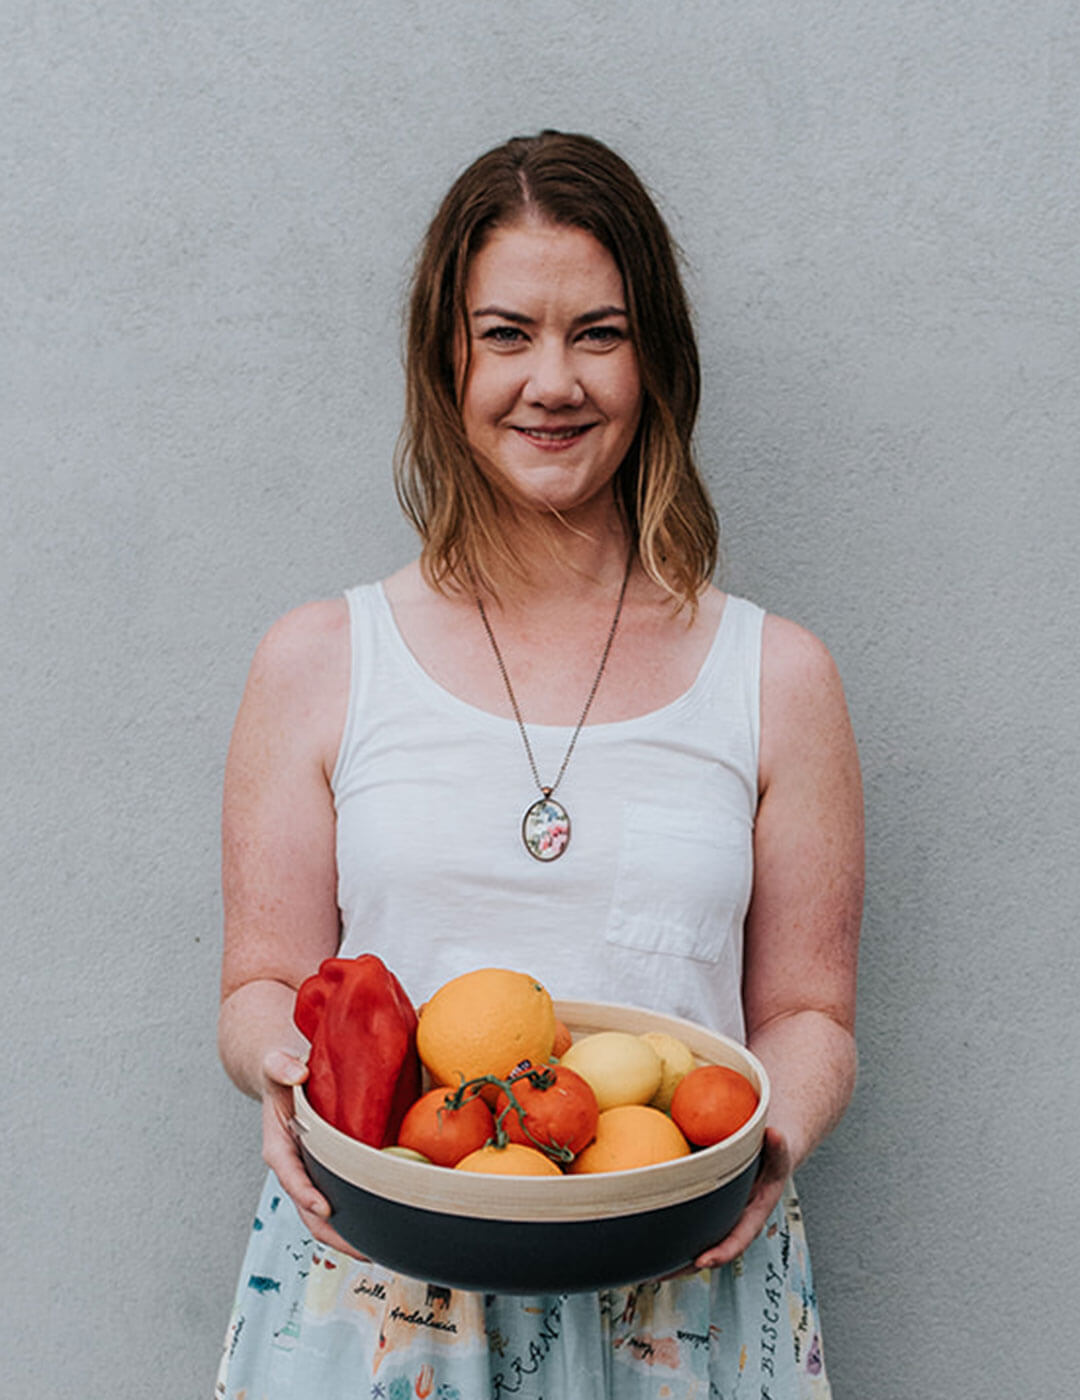 Women's health specialist, Melissa Finlay, holding a bowl of fruit.